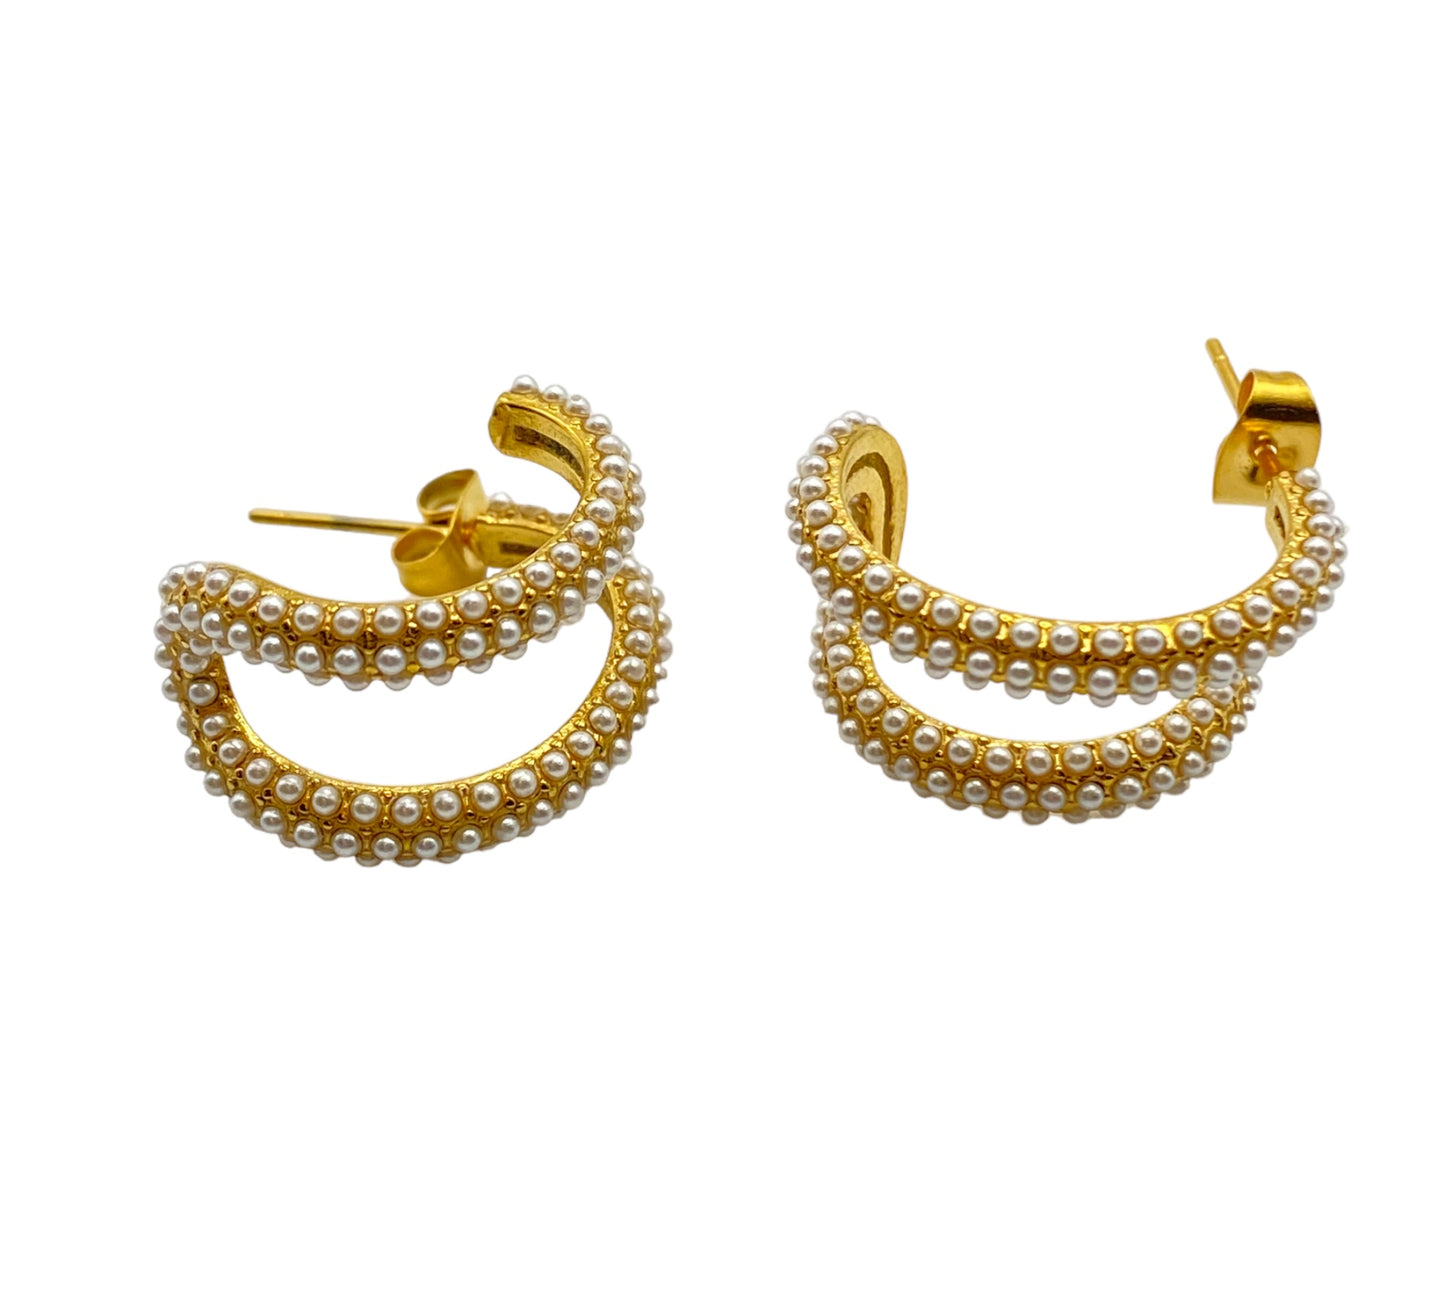 "INCA" gold plated half hoop earrings with double hoop illusion and covered by mini pearl beads